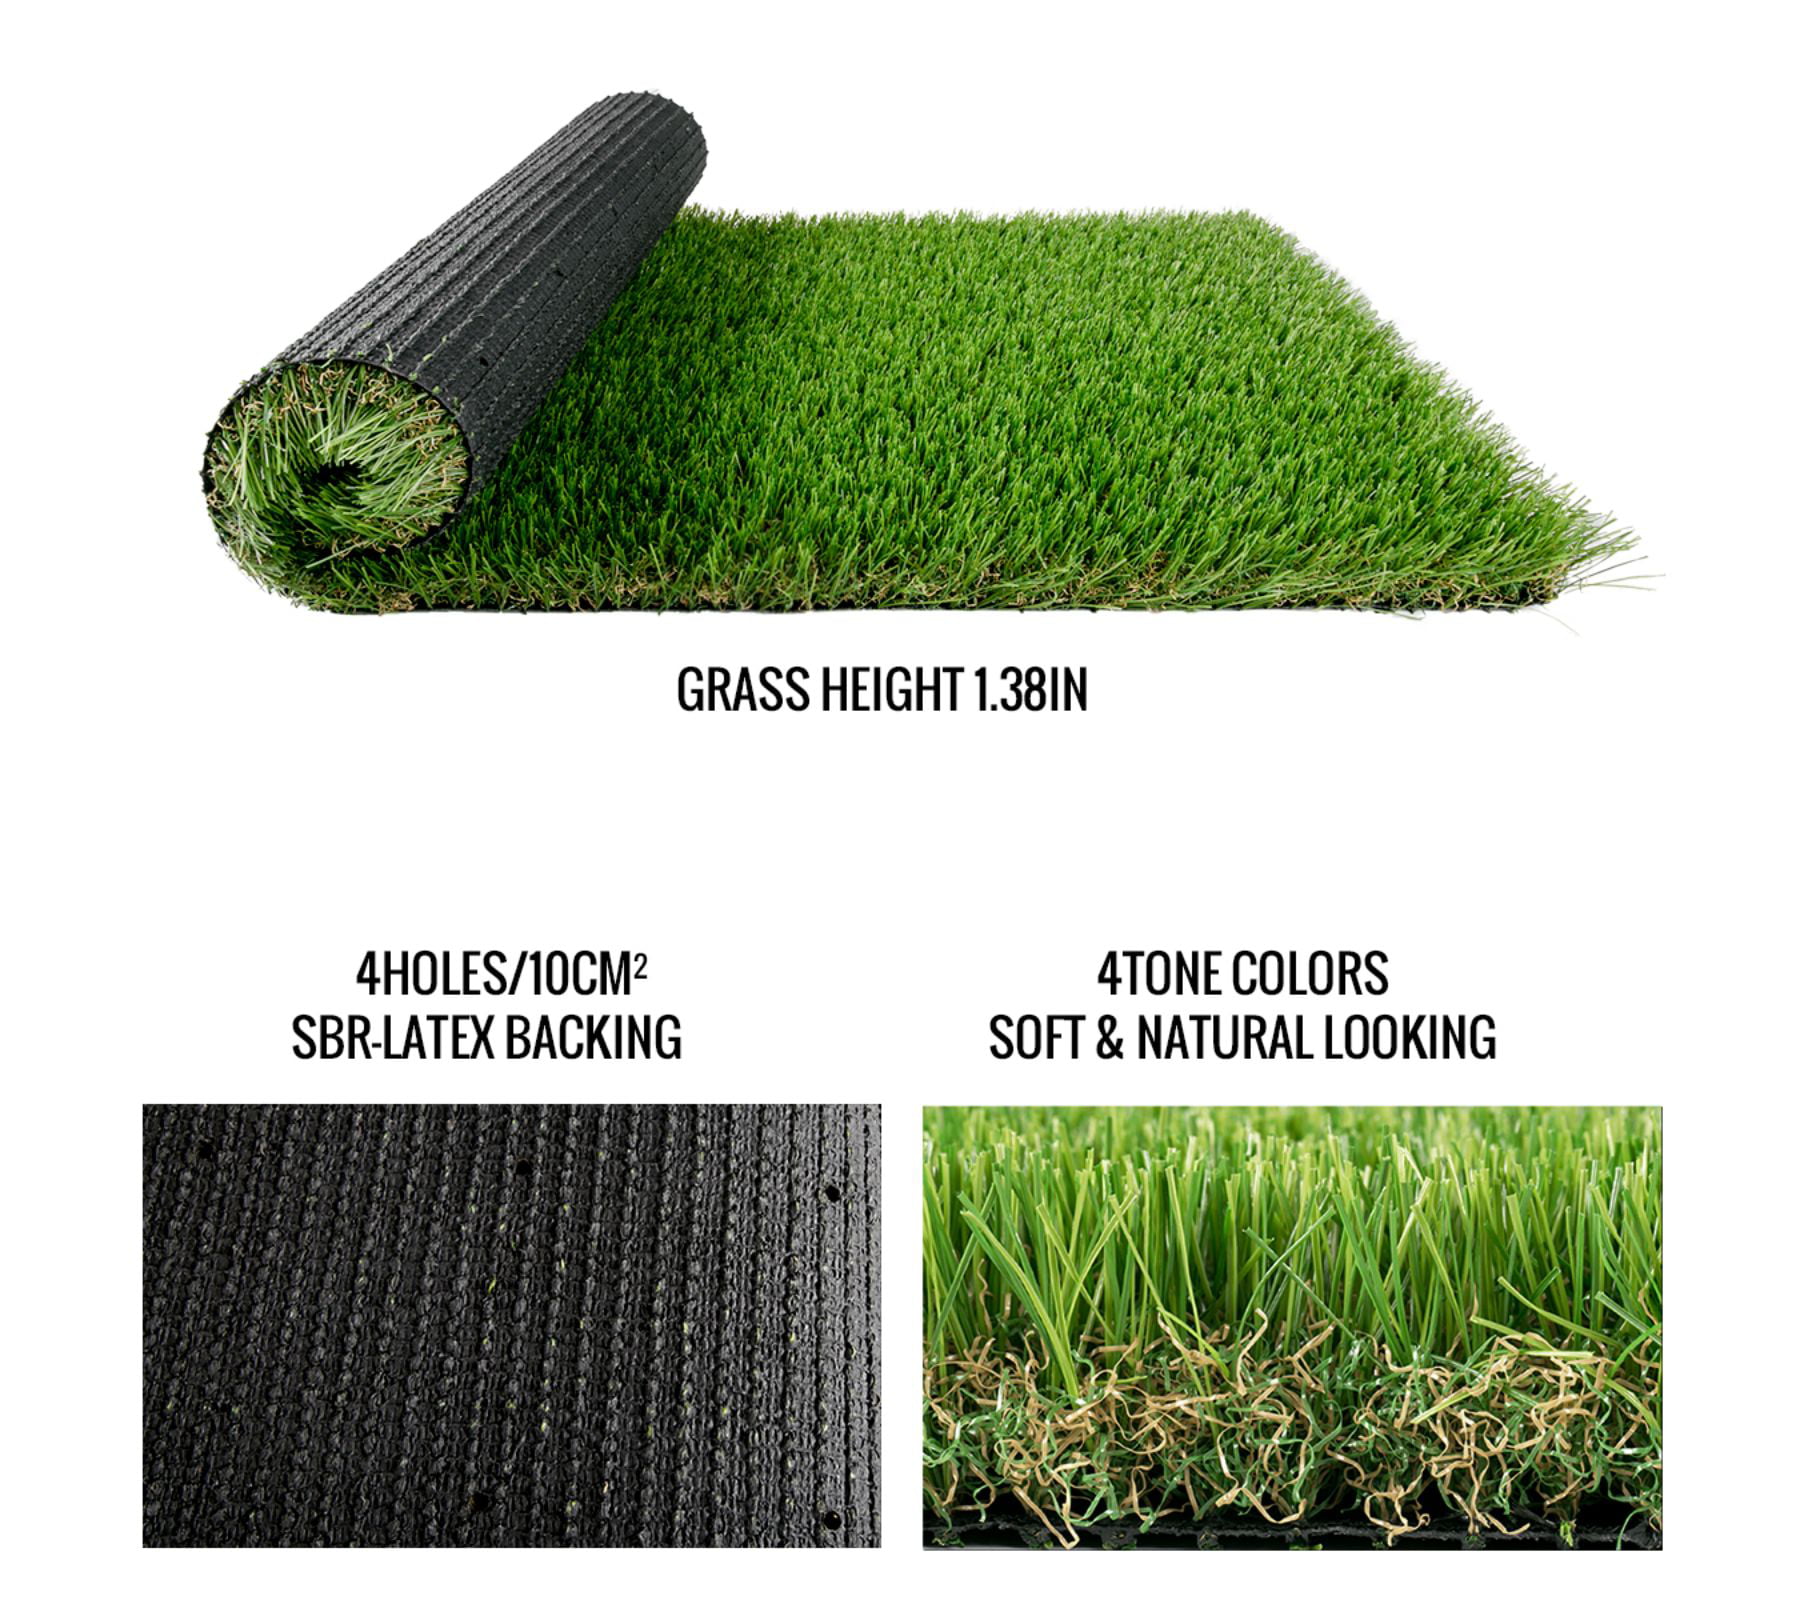 Premium Synthetic Turf Artificial Lawn Fake Grass Backed With Drainage Holes 